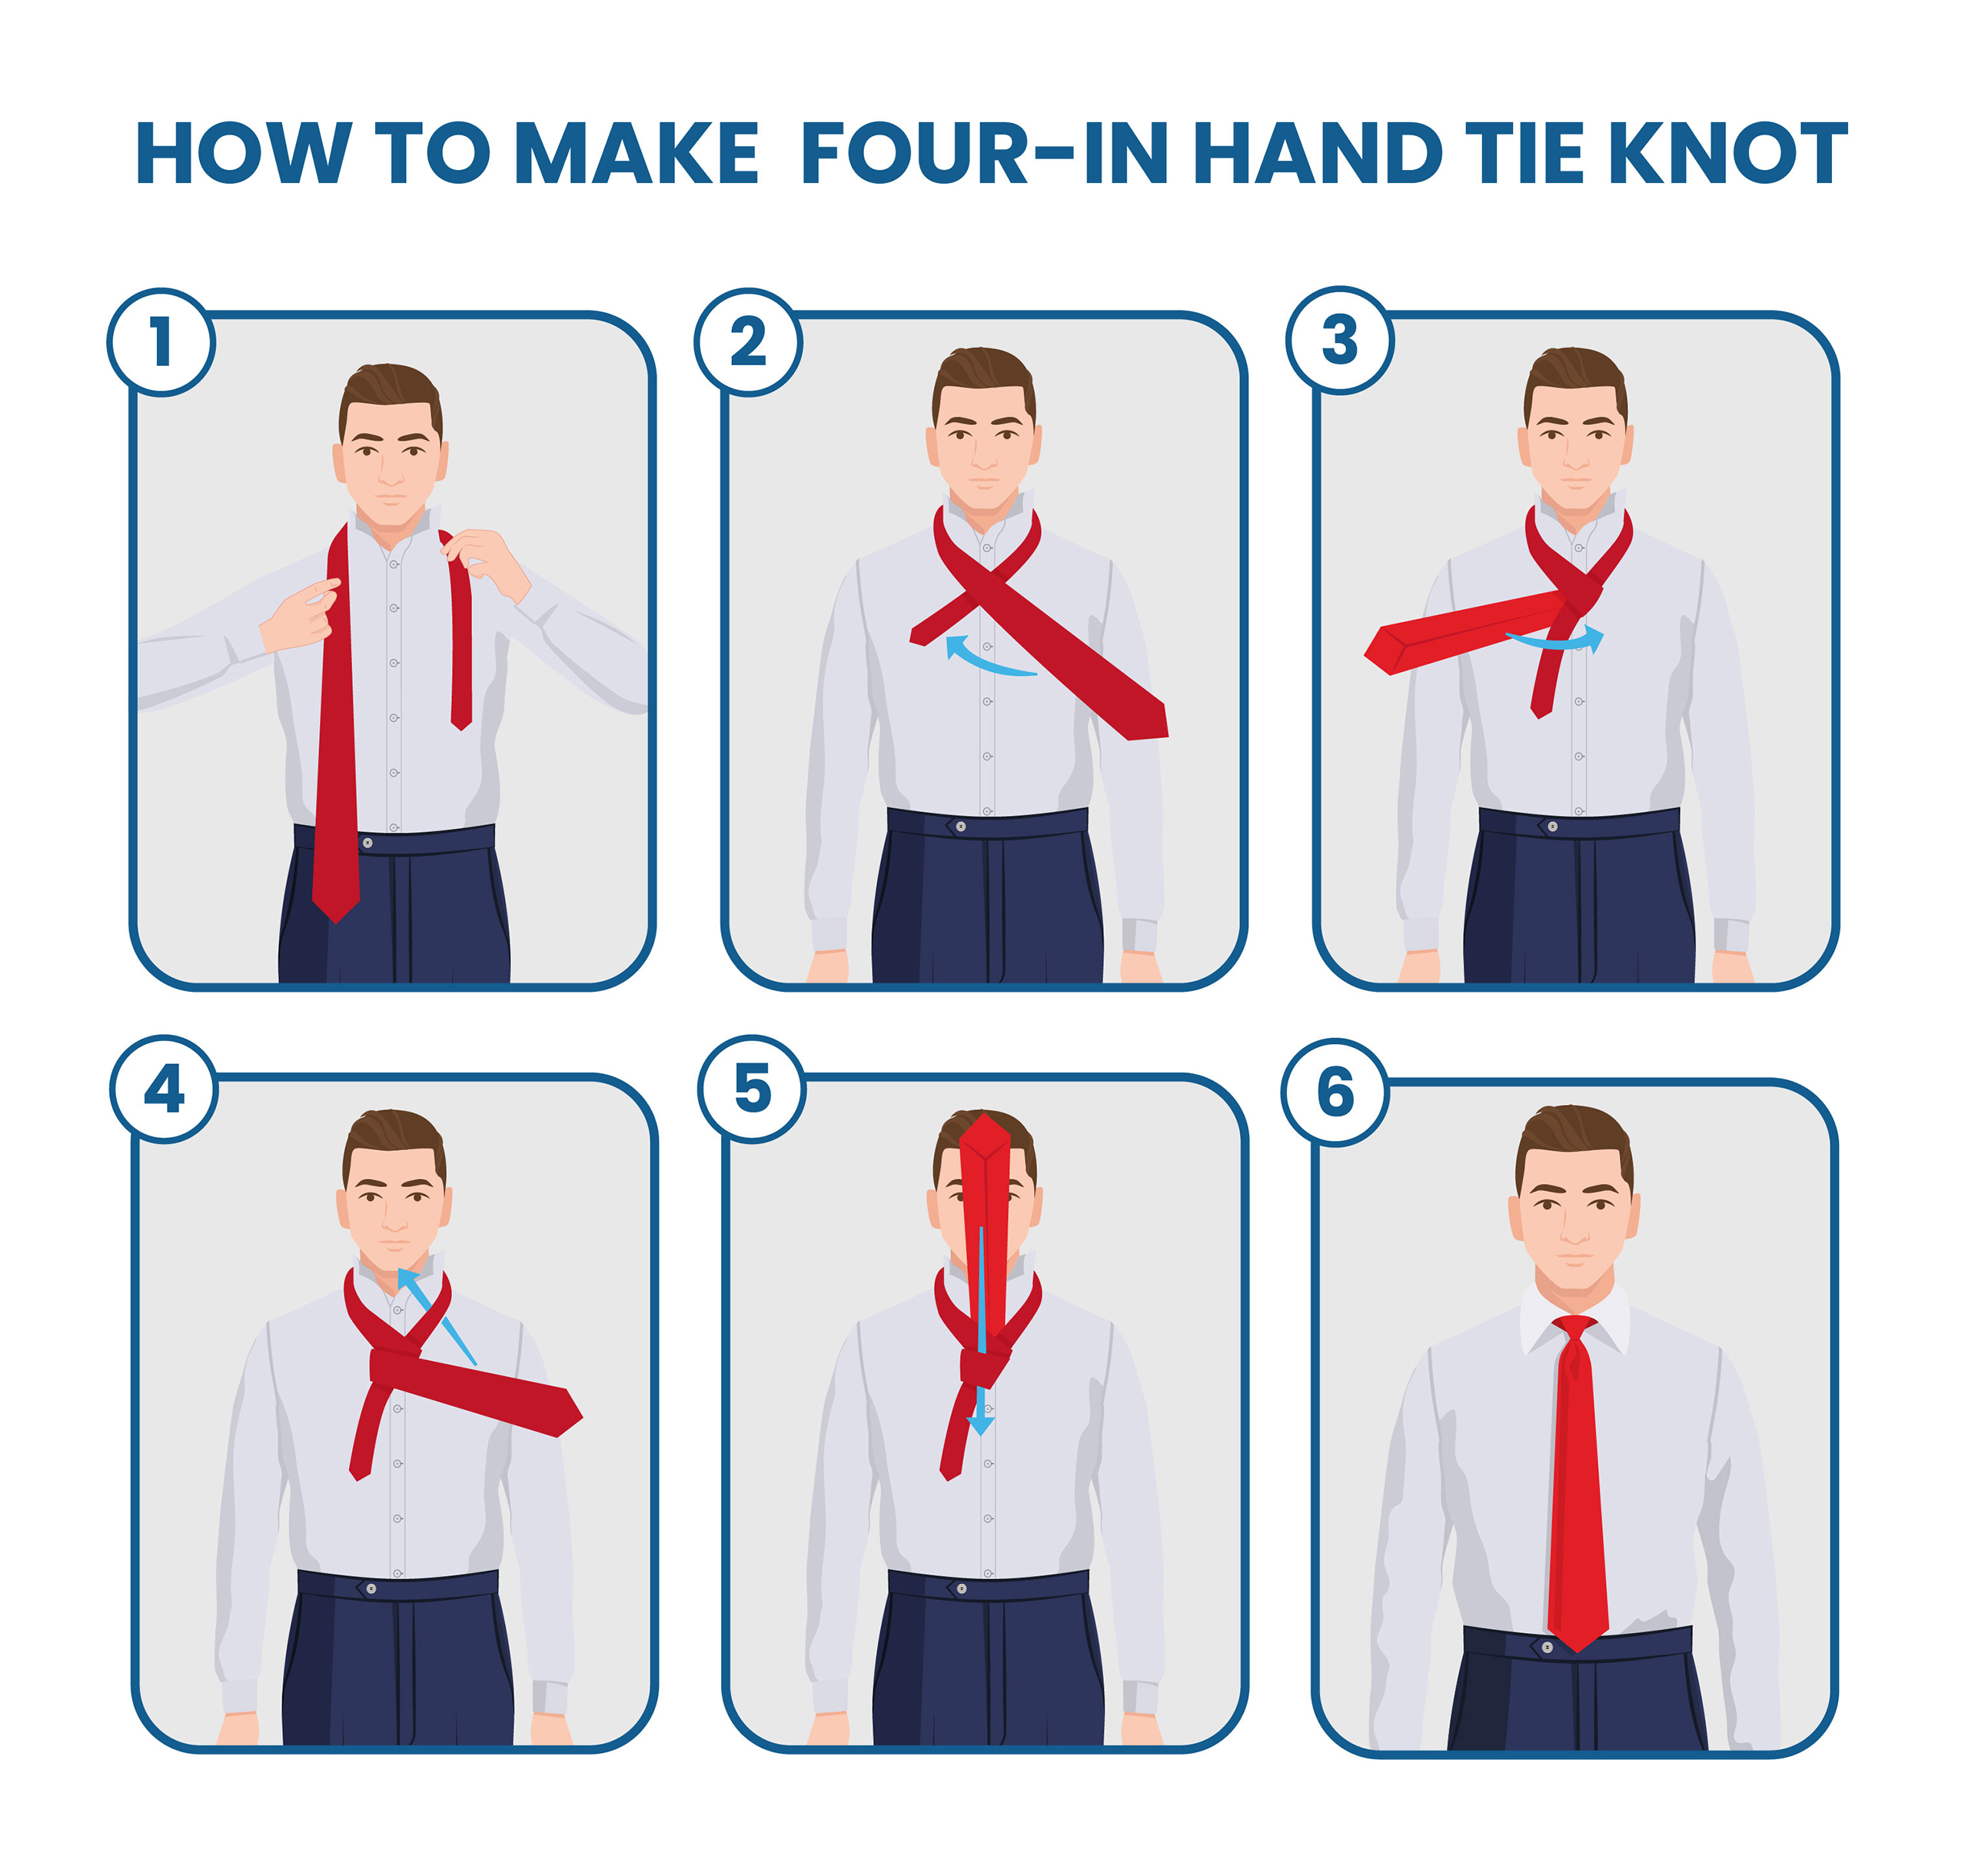 how to tie a tie: the four-in-hand tie knot